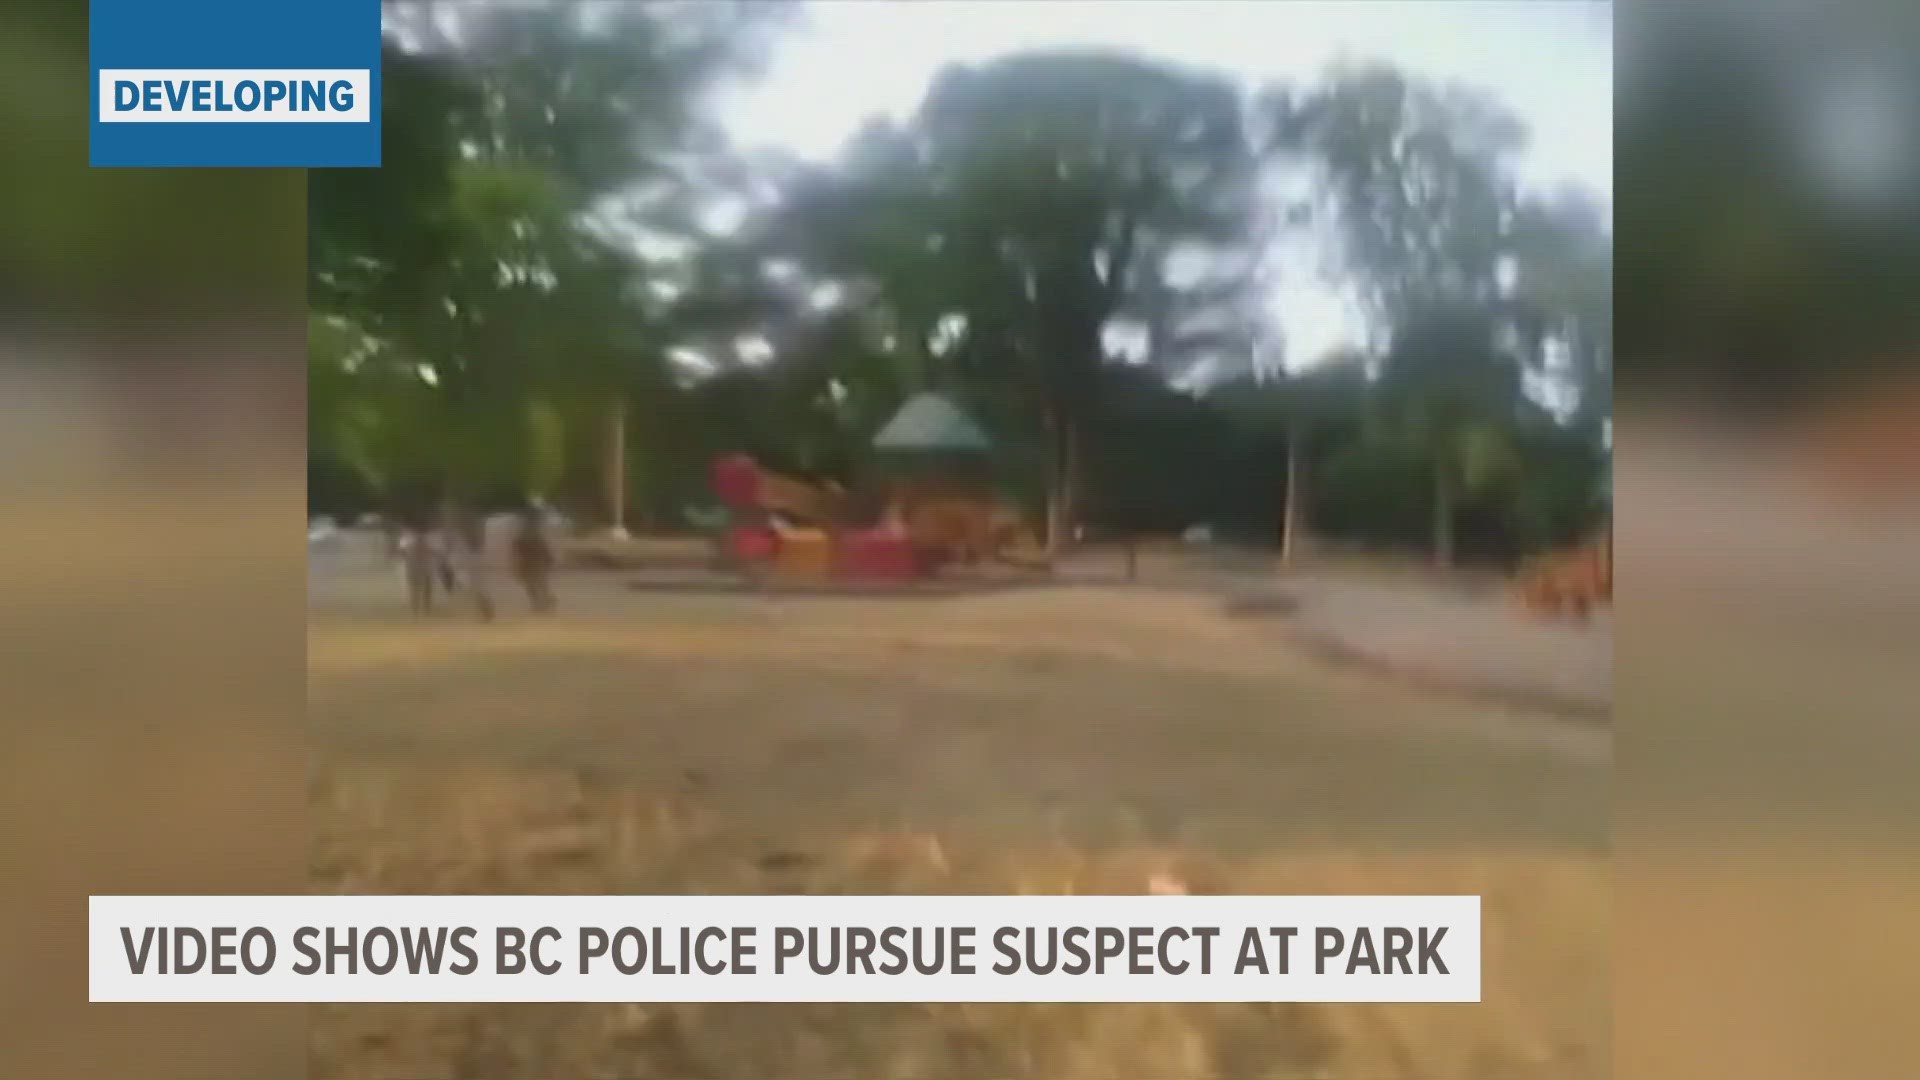 Battle Creek Police said they don't know of any injuries after the fight escalated to shots being fired at Claude Evans Park Wednesday evening.